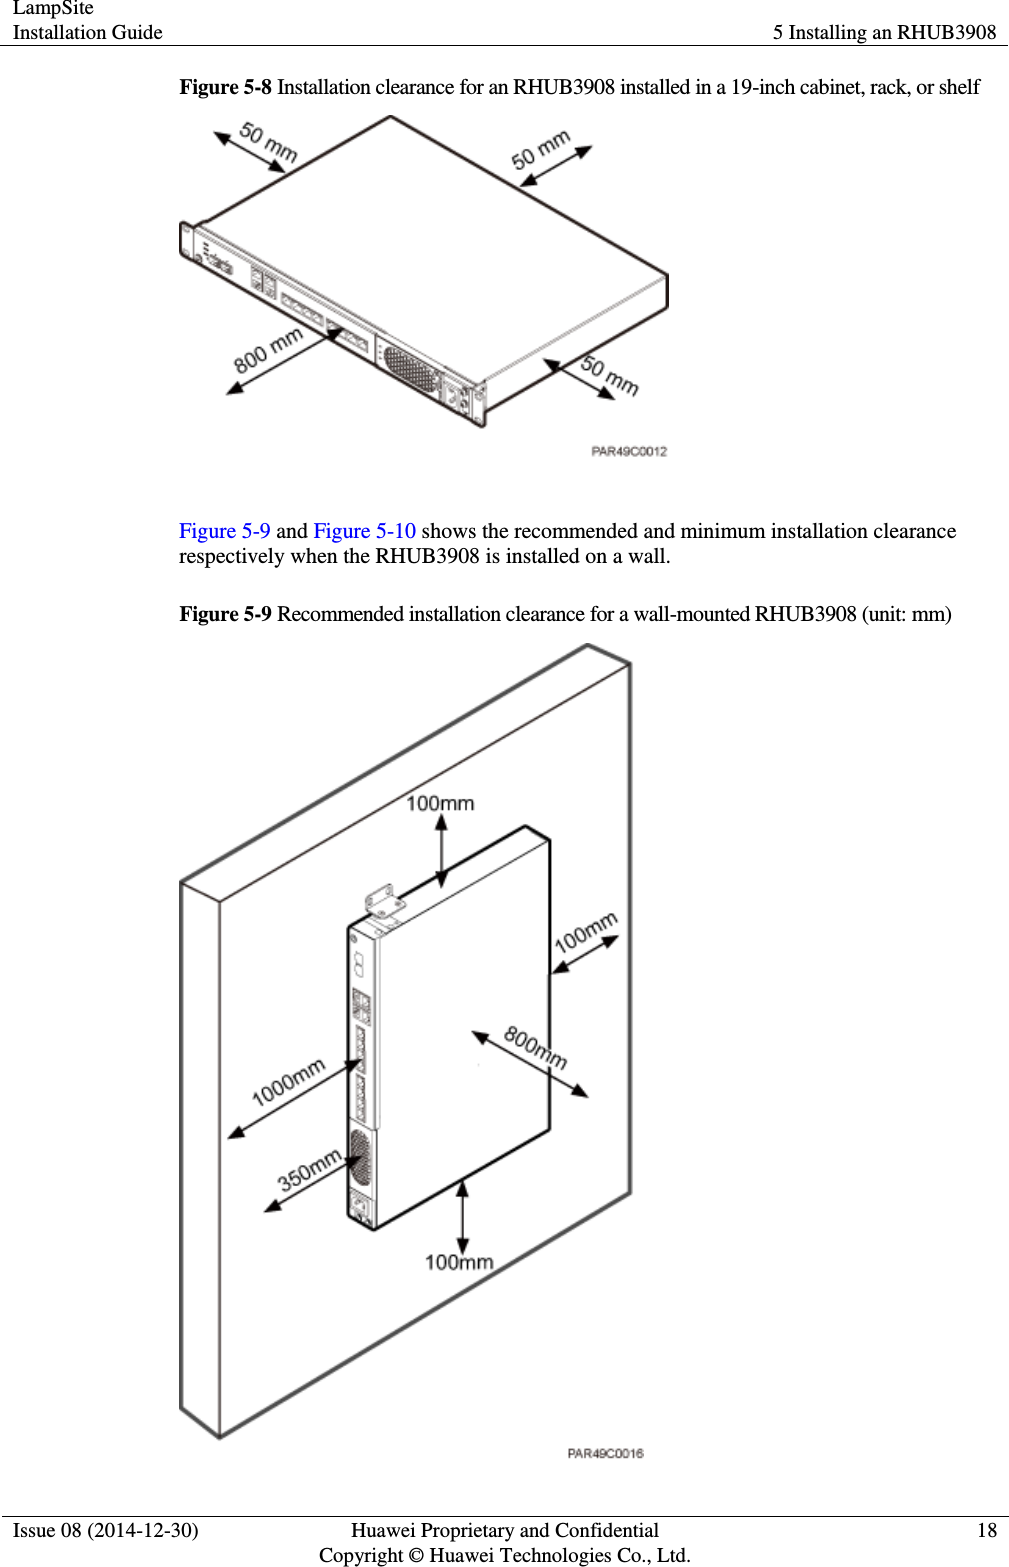 LampSite Installation Guide 5 Installing an RHUB3908  Issue 08 (2014-12-30) Huawei Proprietary and Confidential                                     Copyright © Huawei Technologies Co., Ltd. 18  Figure 5-8 Installation clearance for an RHUB3908 installed in a 19-inch cabinet, rack, or shelf   Figure 5-9 and Figure 5-10 shows the recommended and minimum installation clearance respectively when the RHUB3908 is installed on a wall.   Figure 5-9 Recommended installation clearance for a wall-mounted RHUB3908 (unit: mm)  